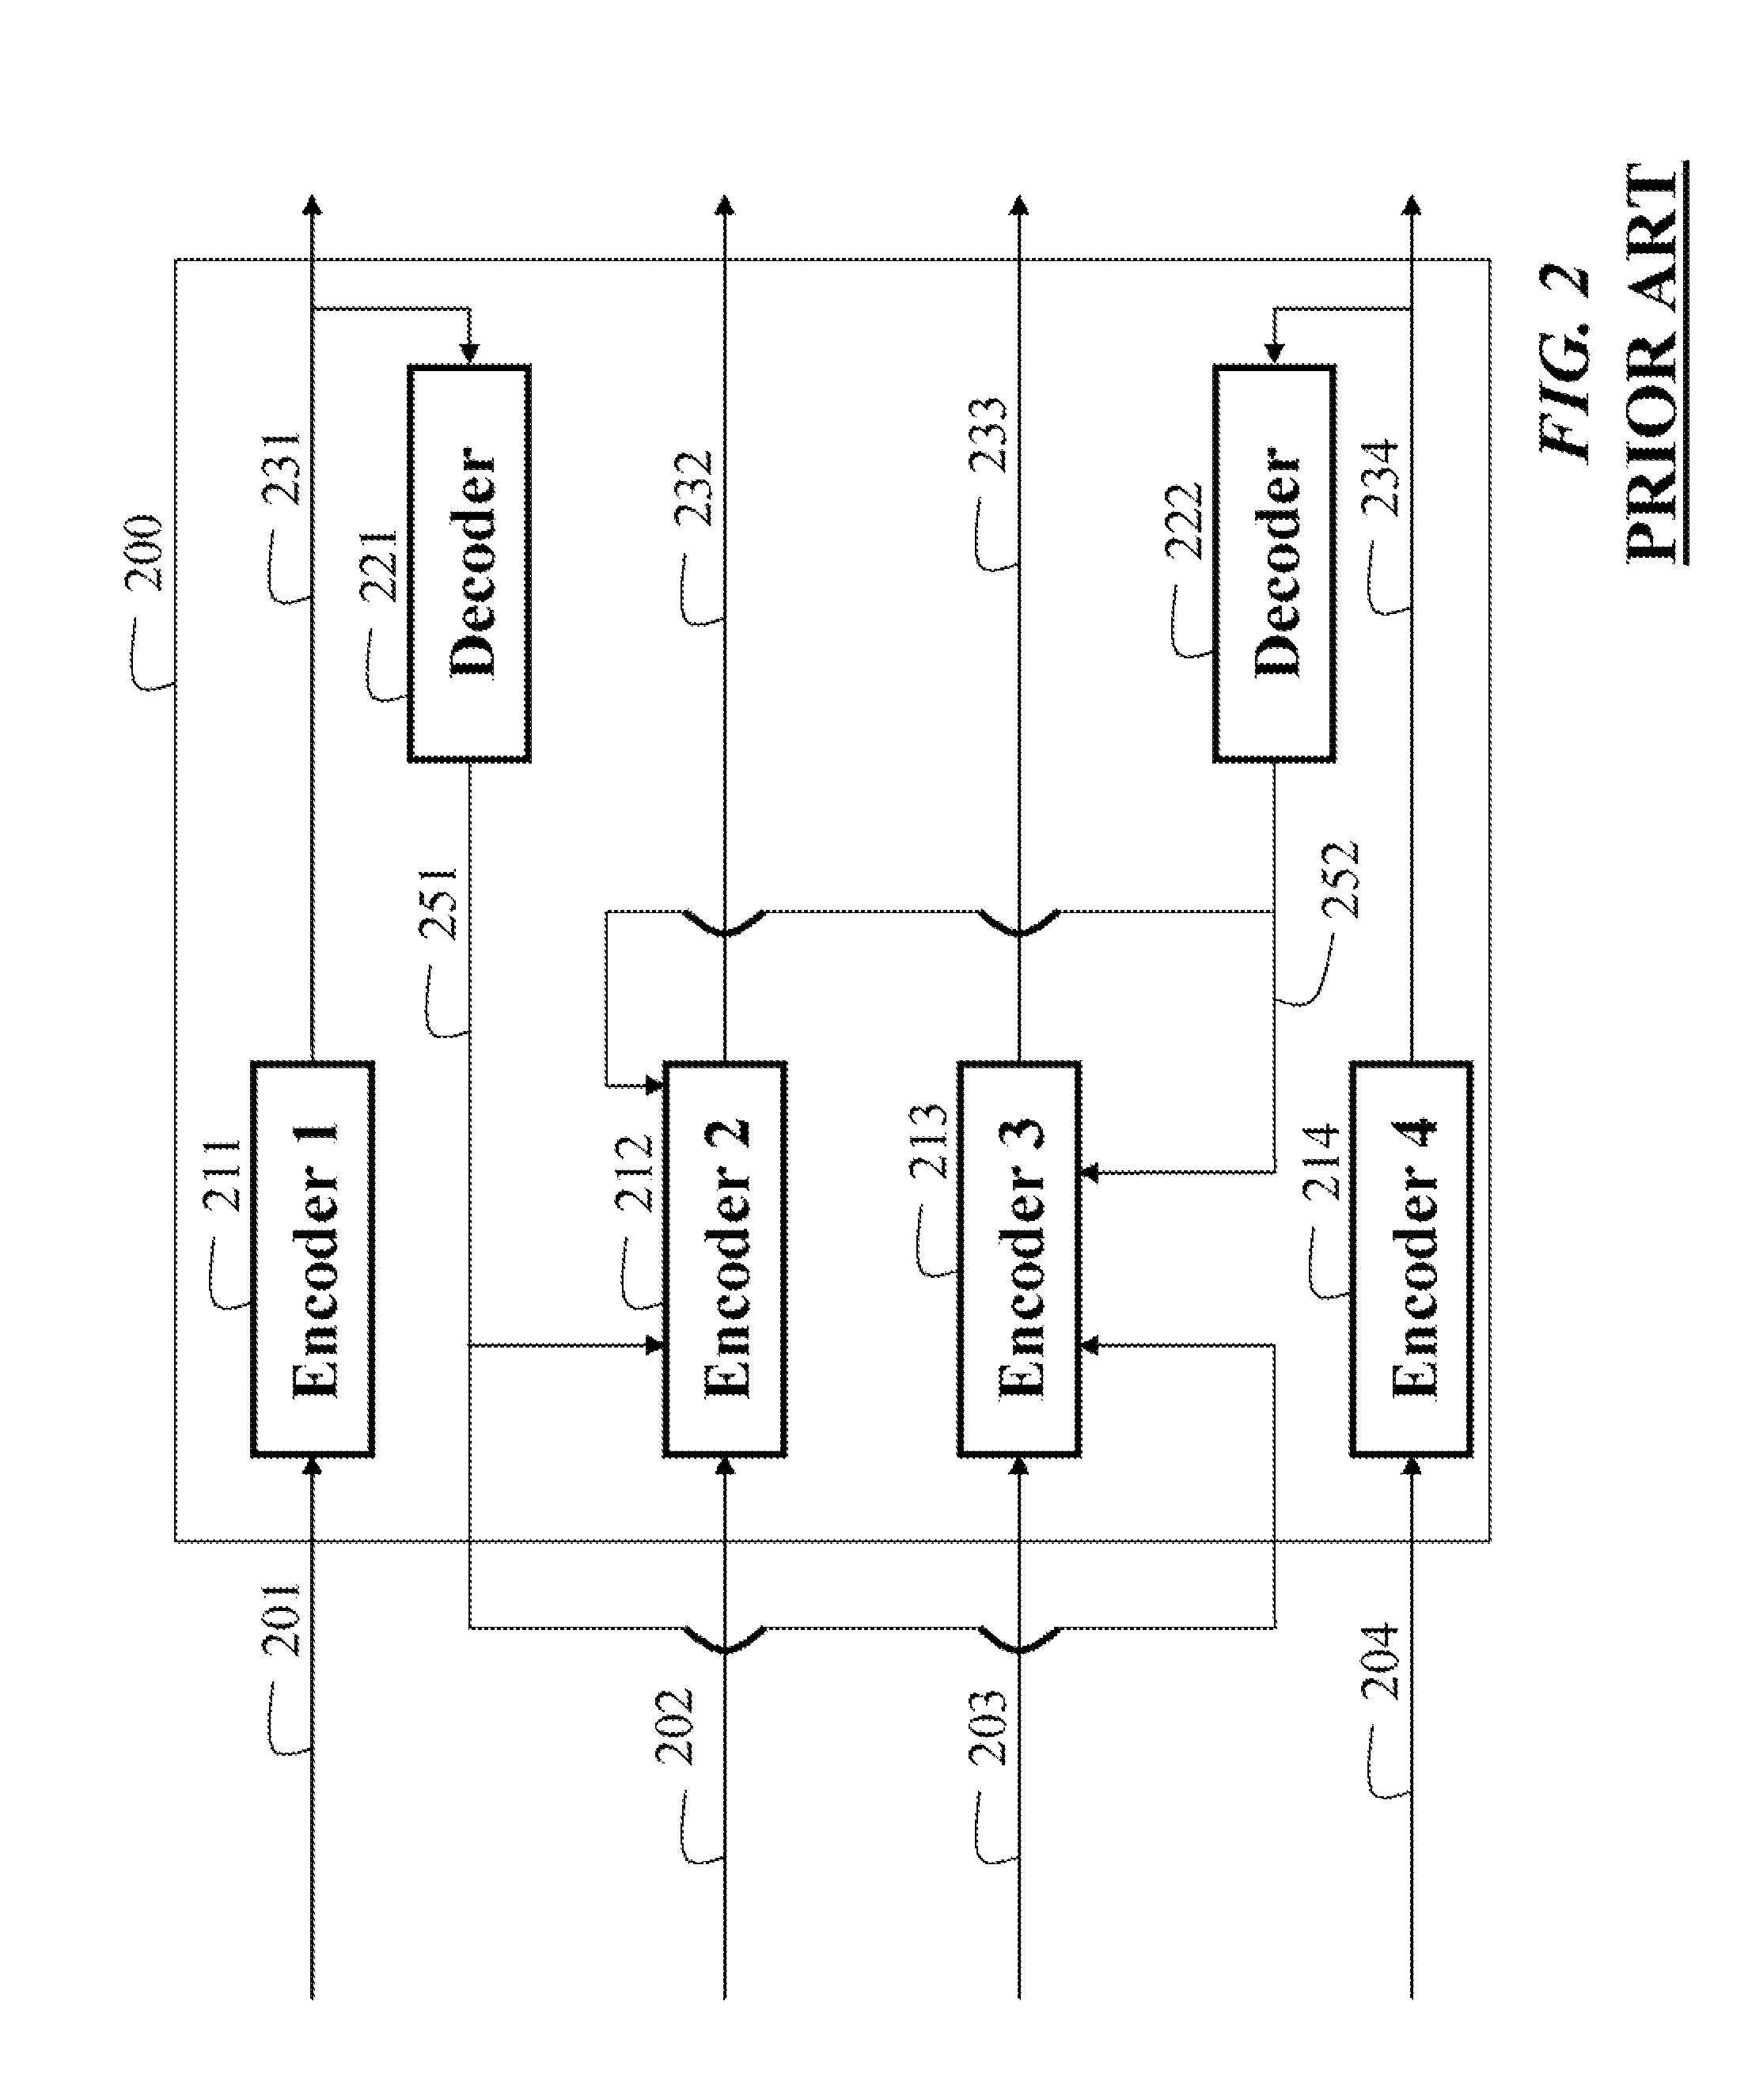 Method and system for processing multiview videos for view synthesis using skip and direct modes